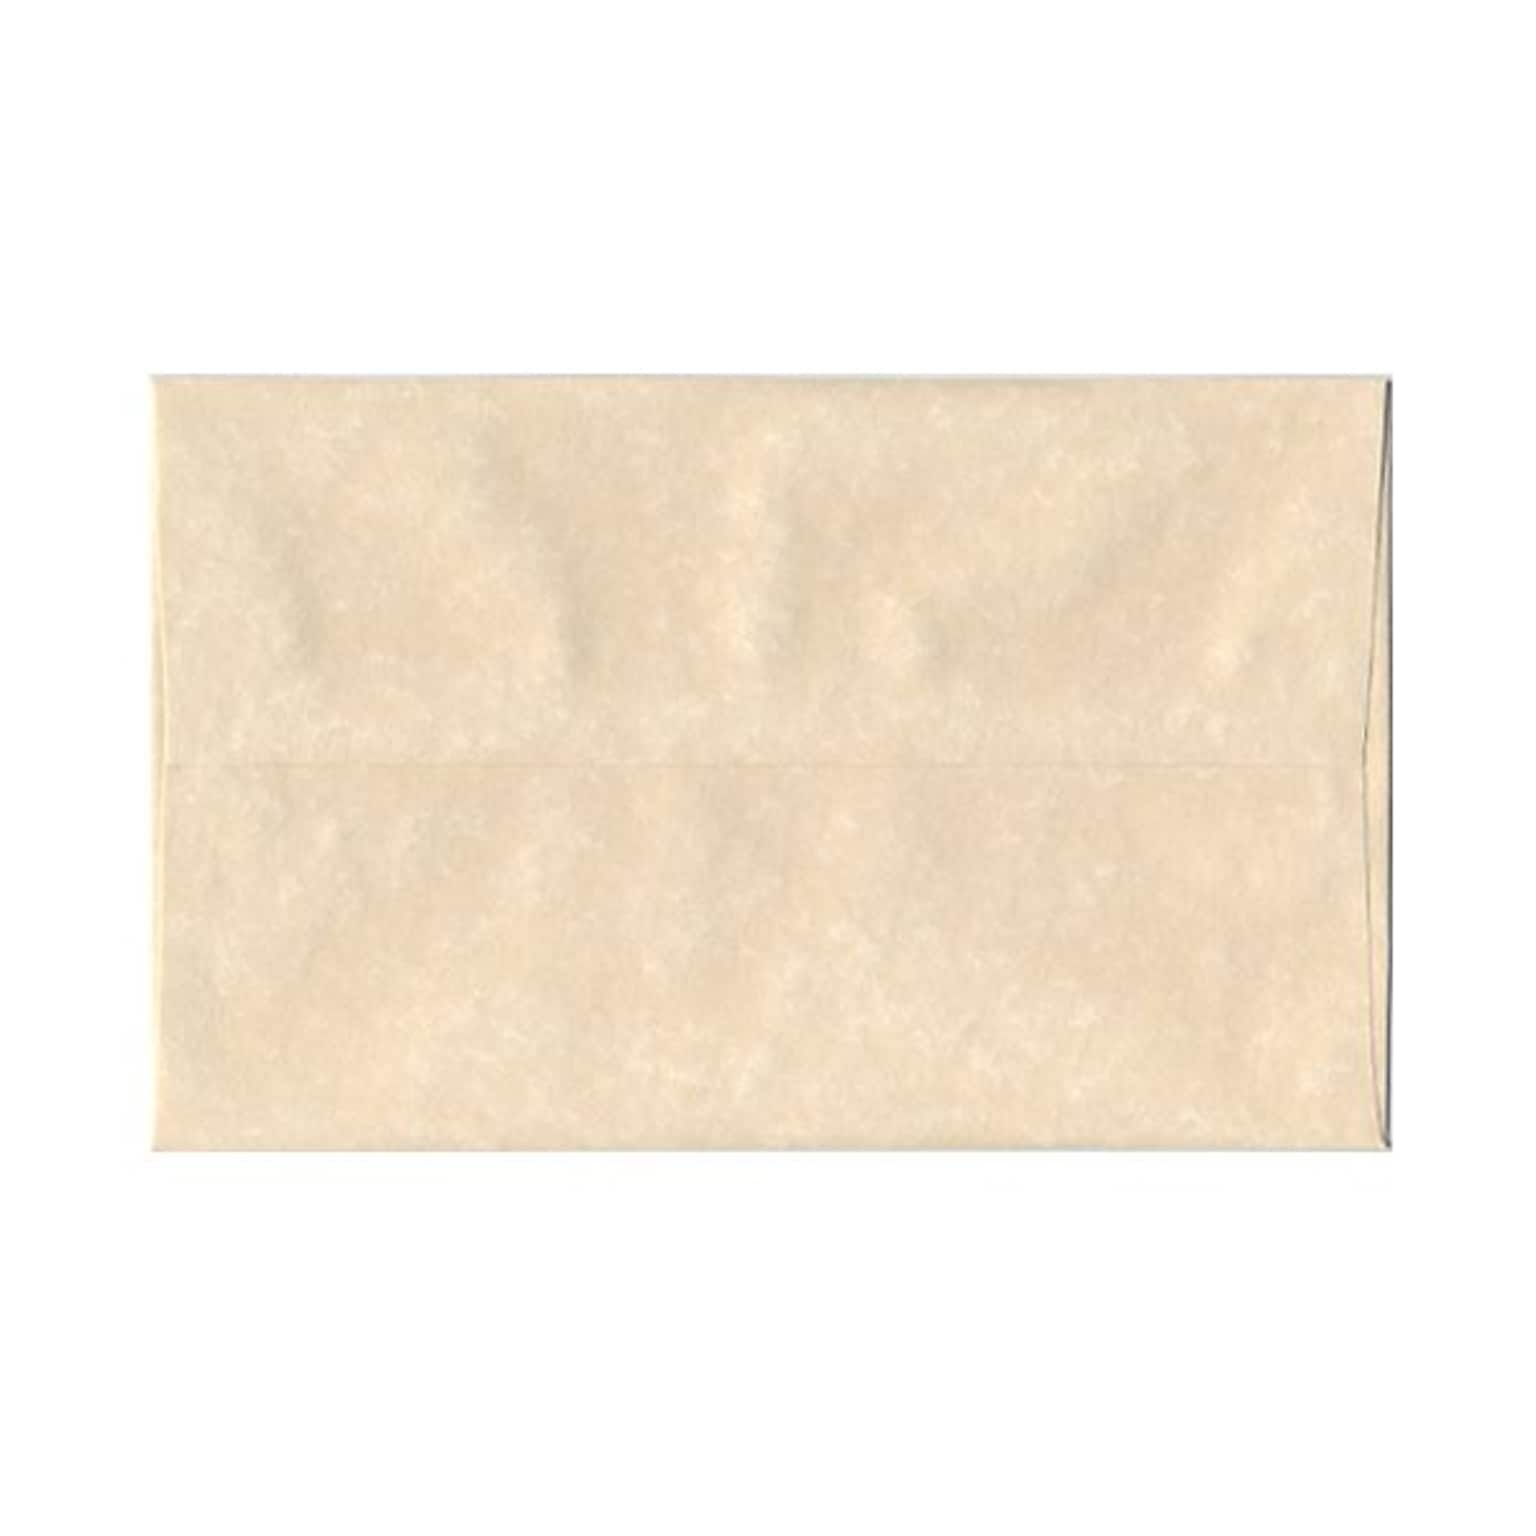 JAM Paper A10 Parchment Invitation Envelopes, 6 x 9.5, Natural Recycled, 25/Pack (47876)